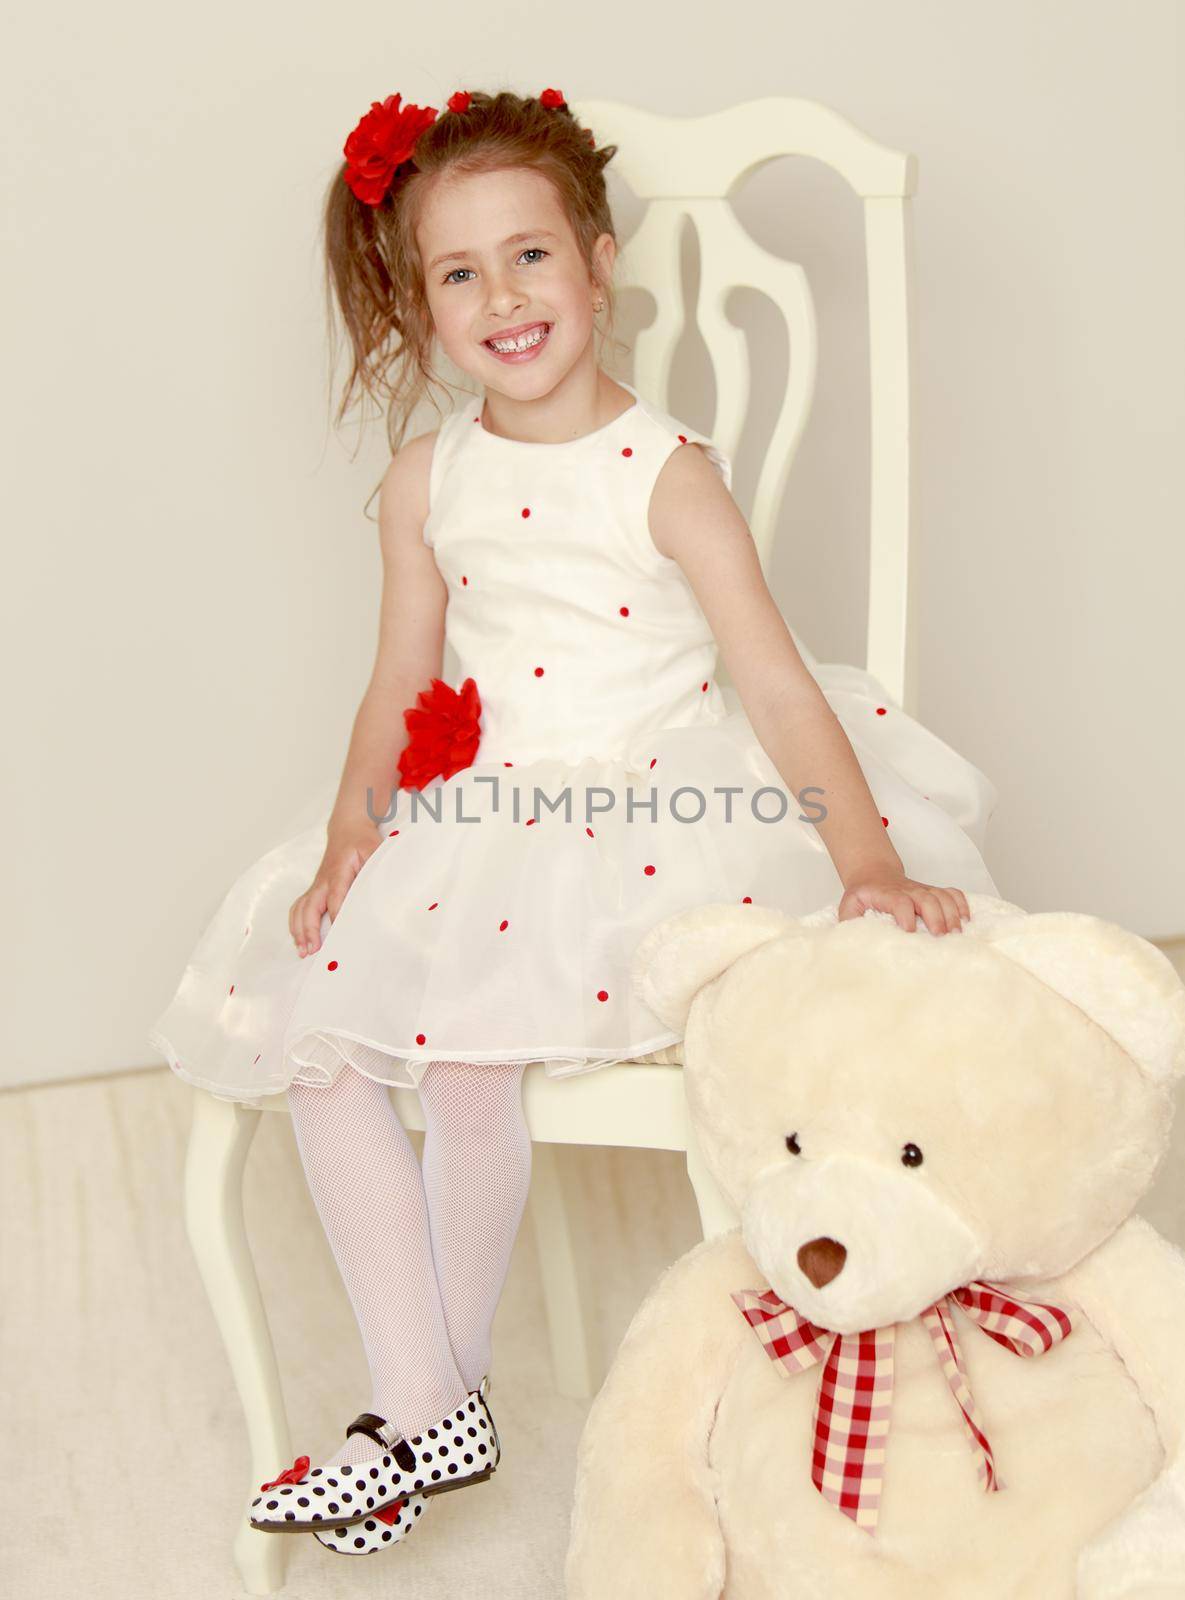 Cute little girl in white dress sitting on a white chair . The girl holds the head of a large Teddy bear